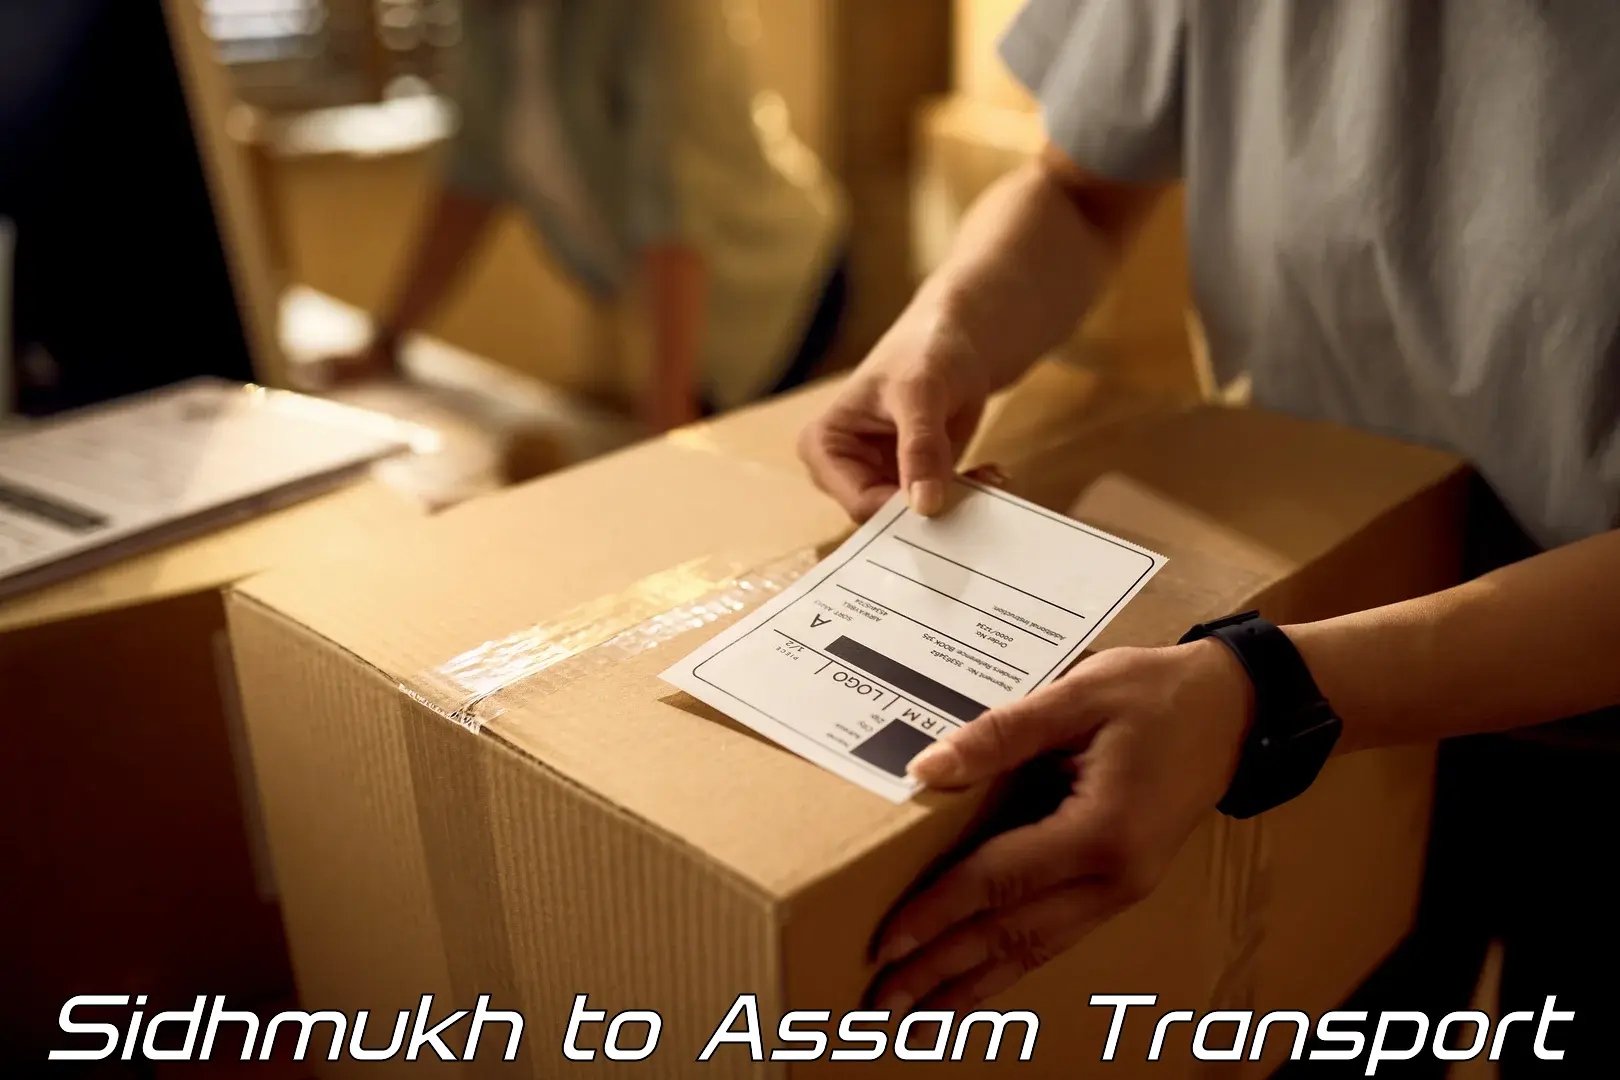 Express transport services Sidhmukh to Guwahati